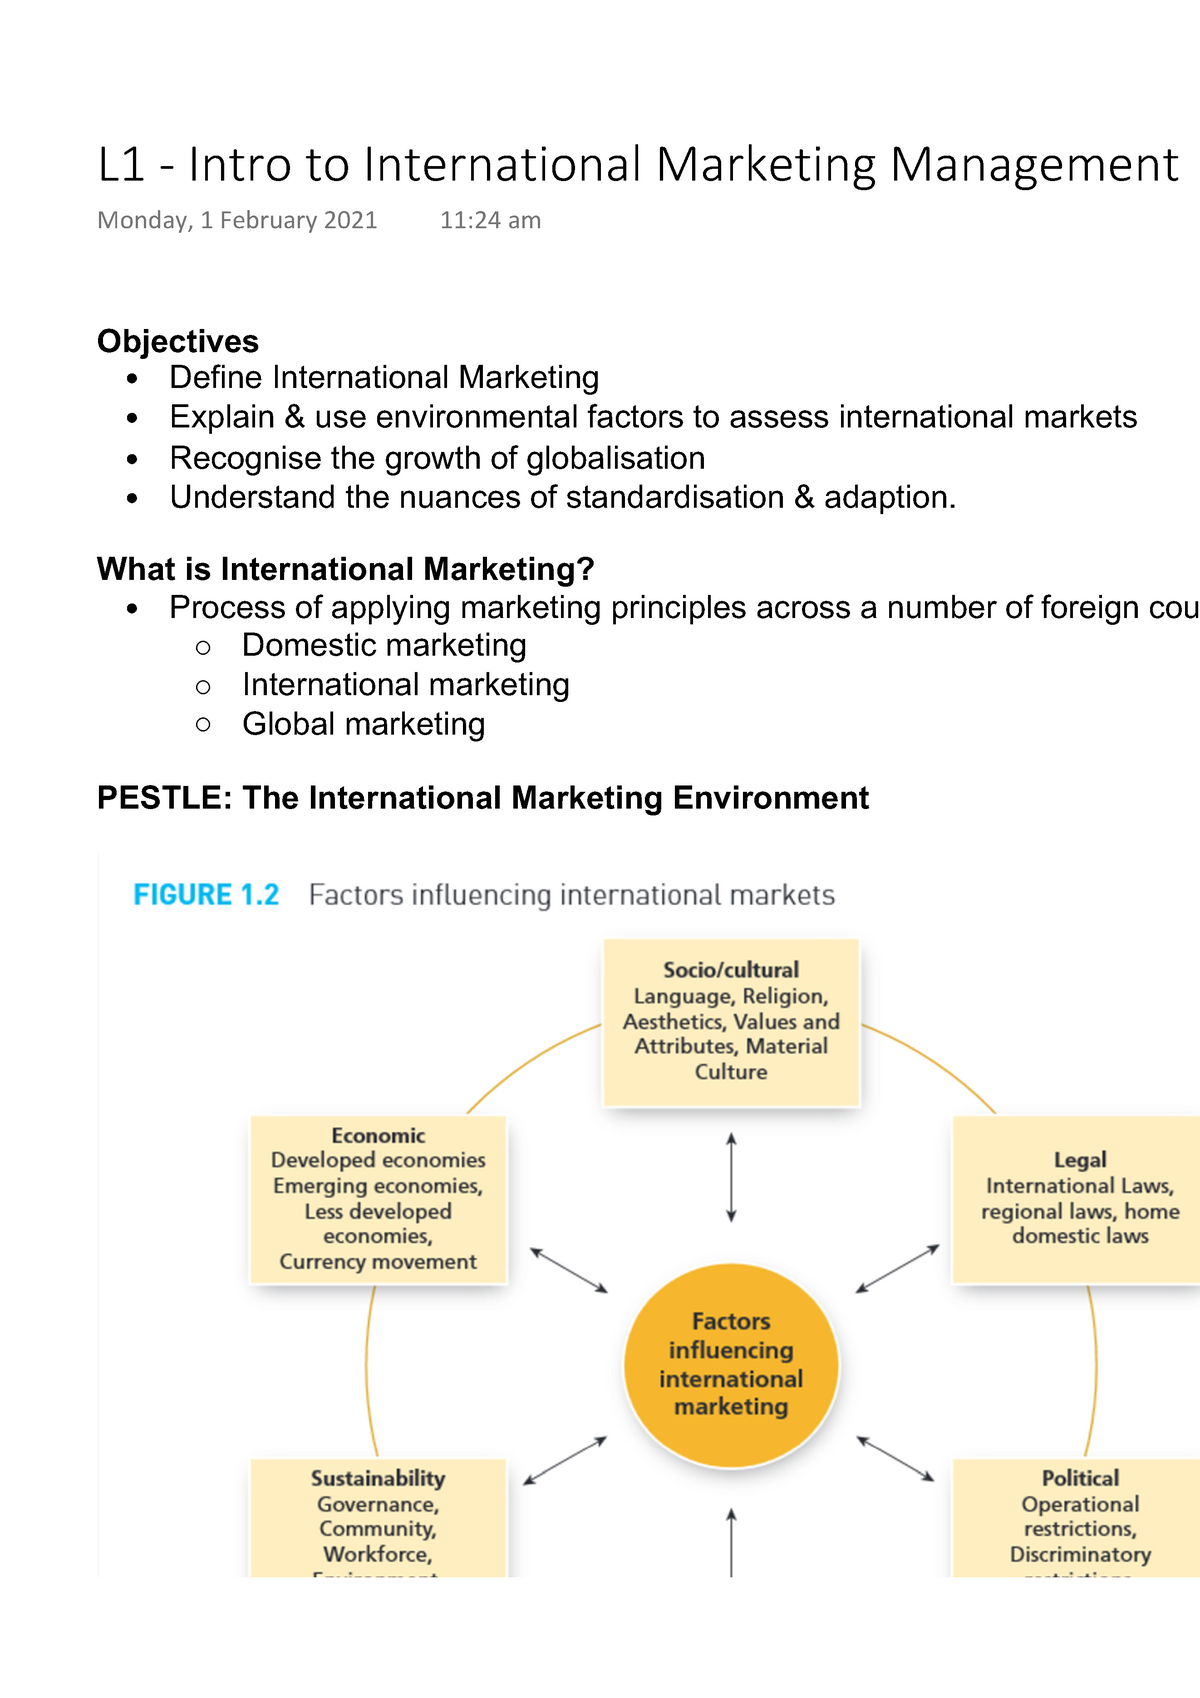 political and legal environment in international marketing